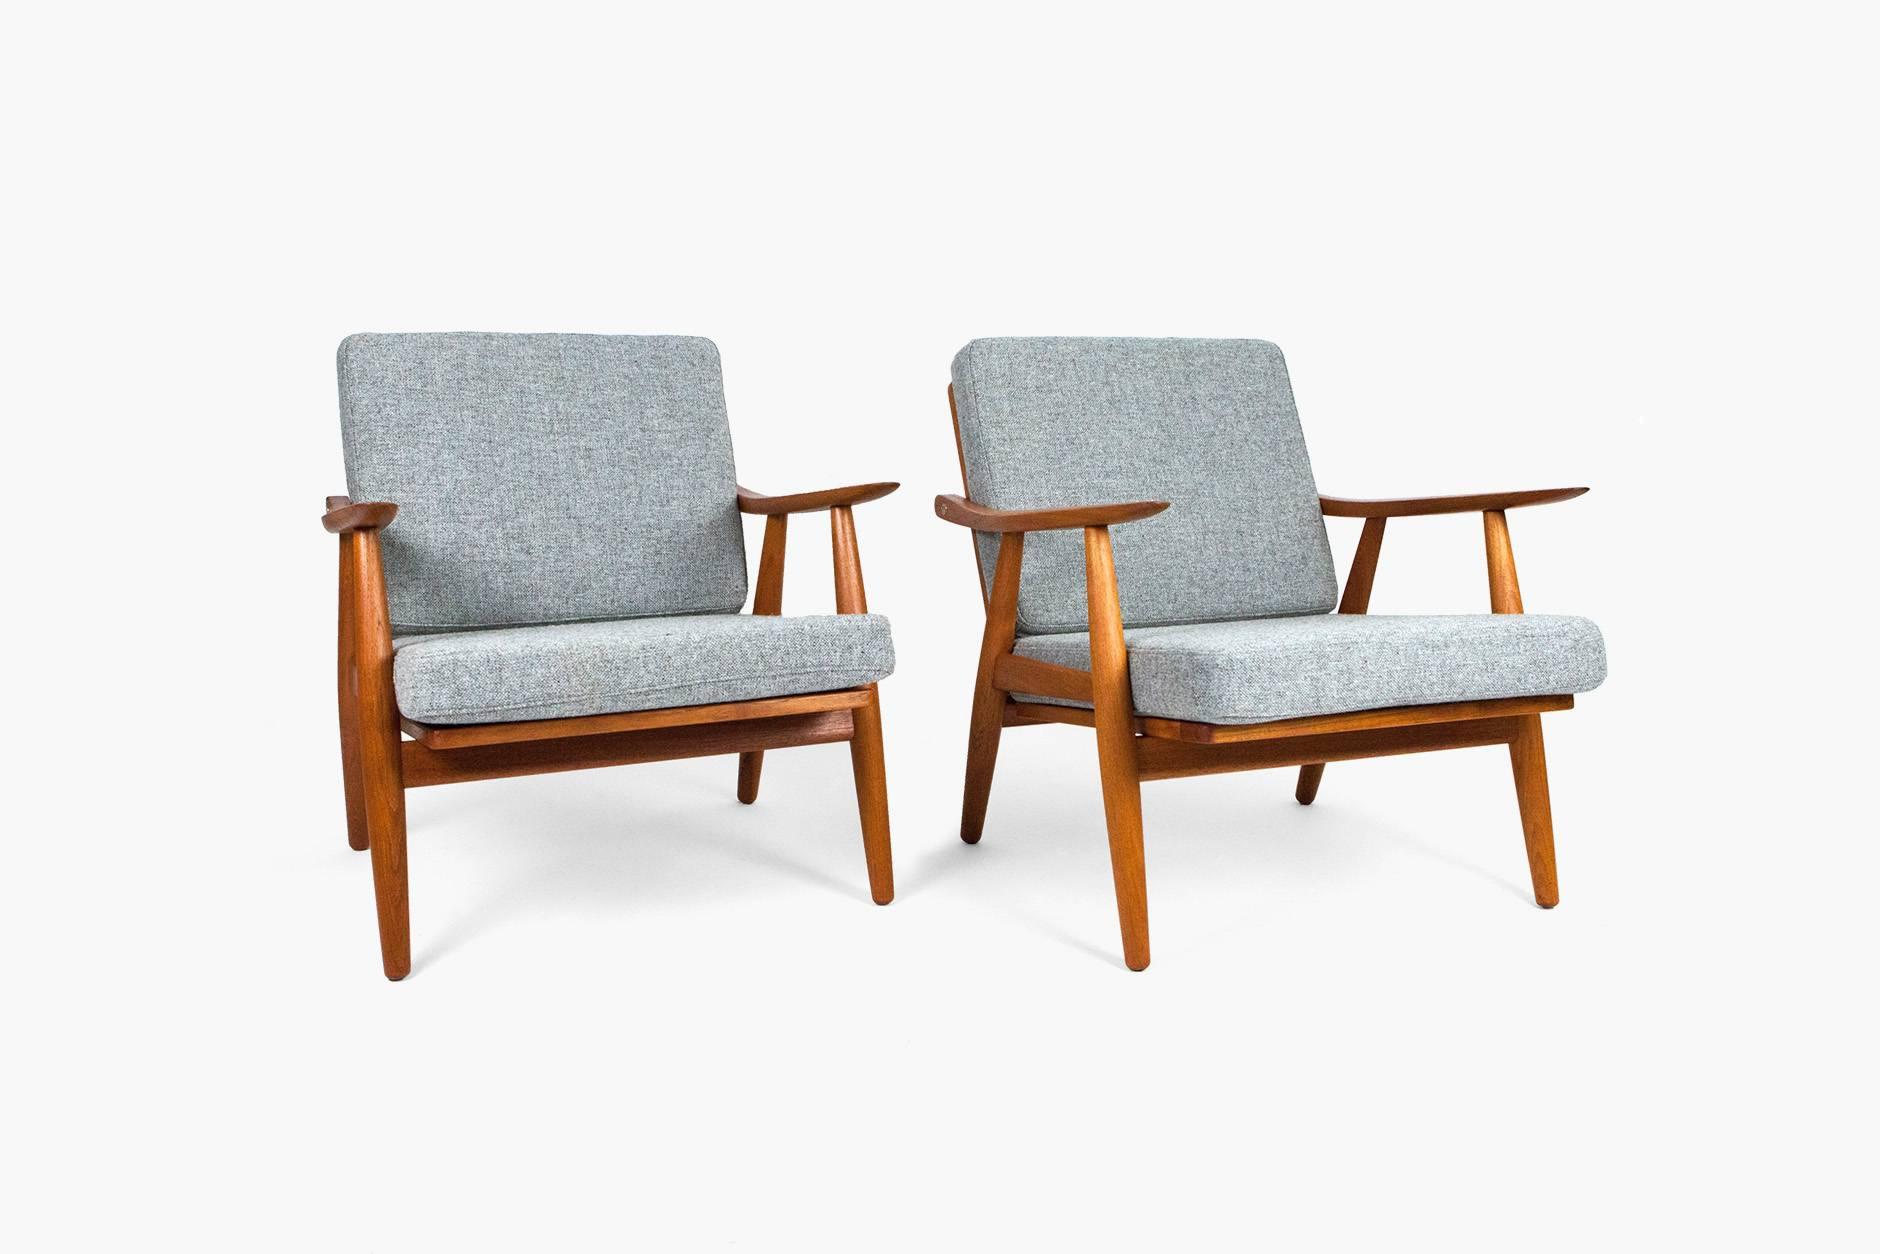 Hans J. Wegner GE-270 lounge chairs, 1956. Produced by Getama Gedsted, Denmark. Restored teak frames with exposed brass fixtures. New cushions covered in Kvadrat Hallingdal 130 fabric.
 